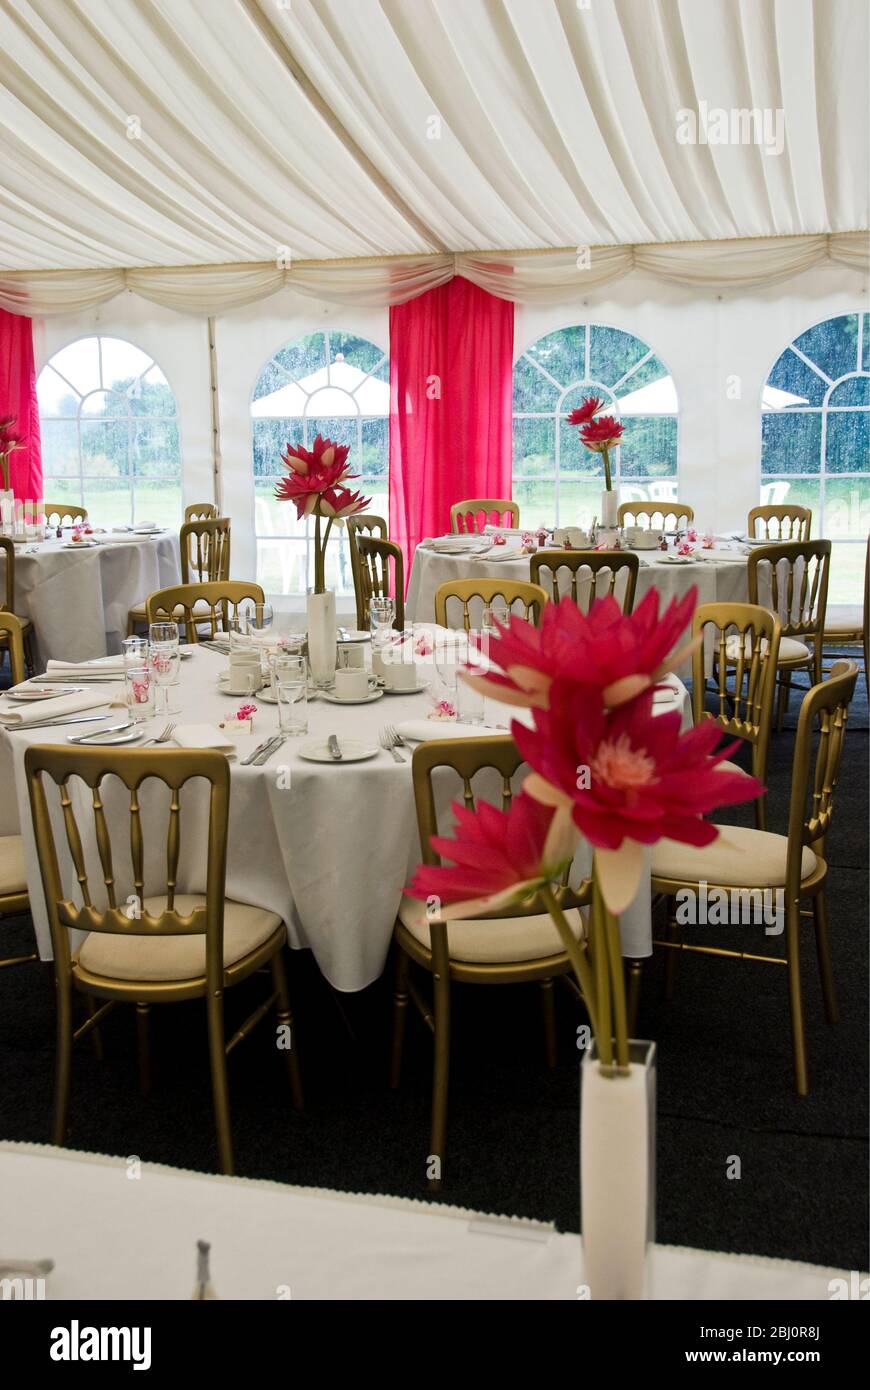 Interior of marquee decorated for a summer wedding in shades of pink and white - Stock Photo